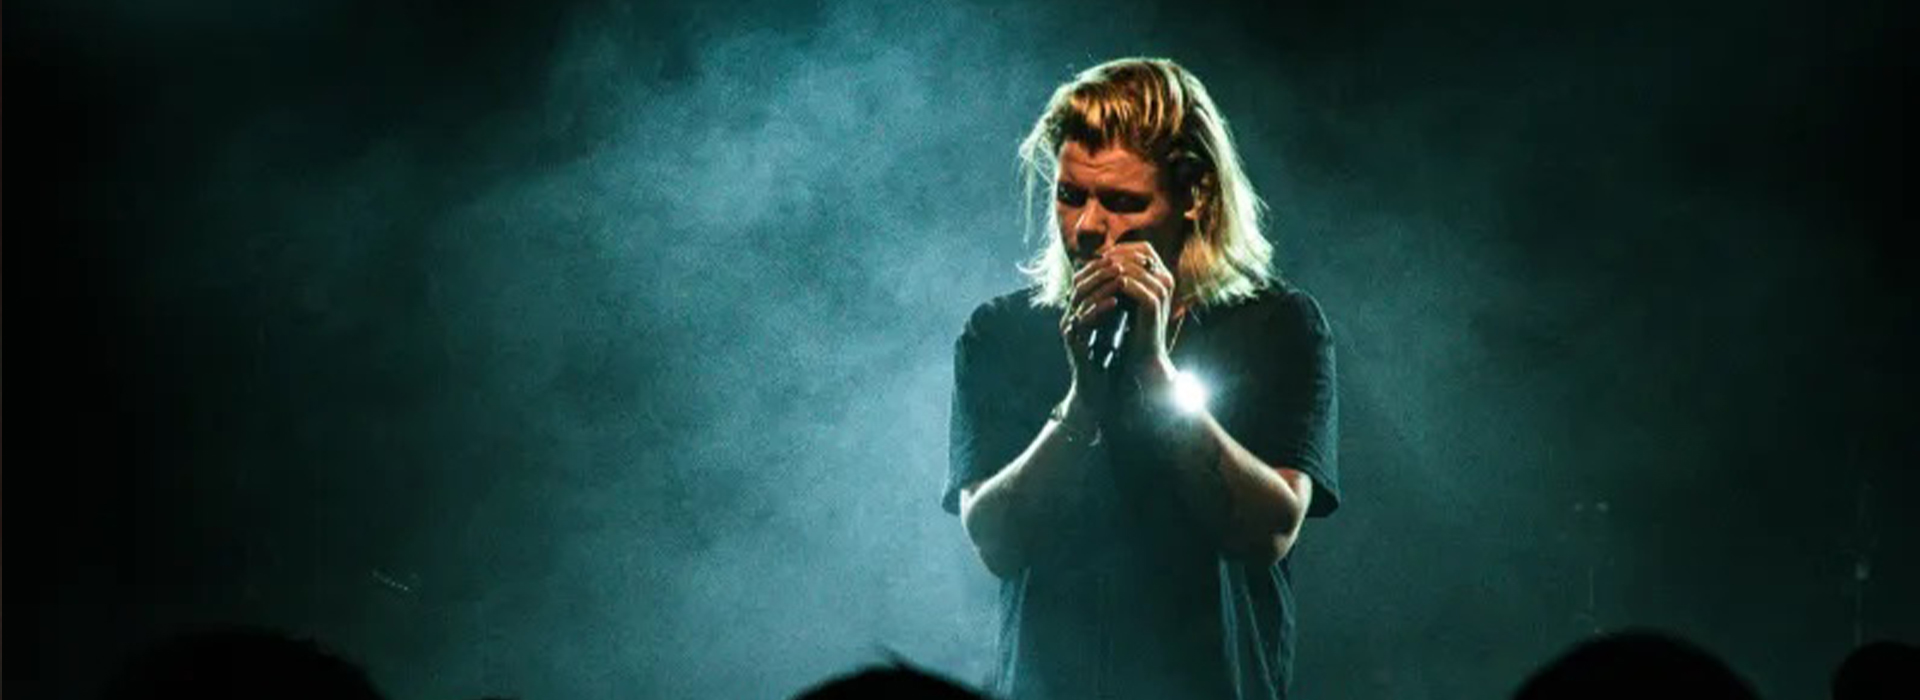 Conrad Sewell Performing Live at Mullum Ex Services